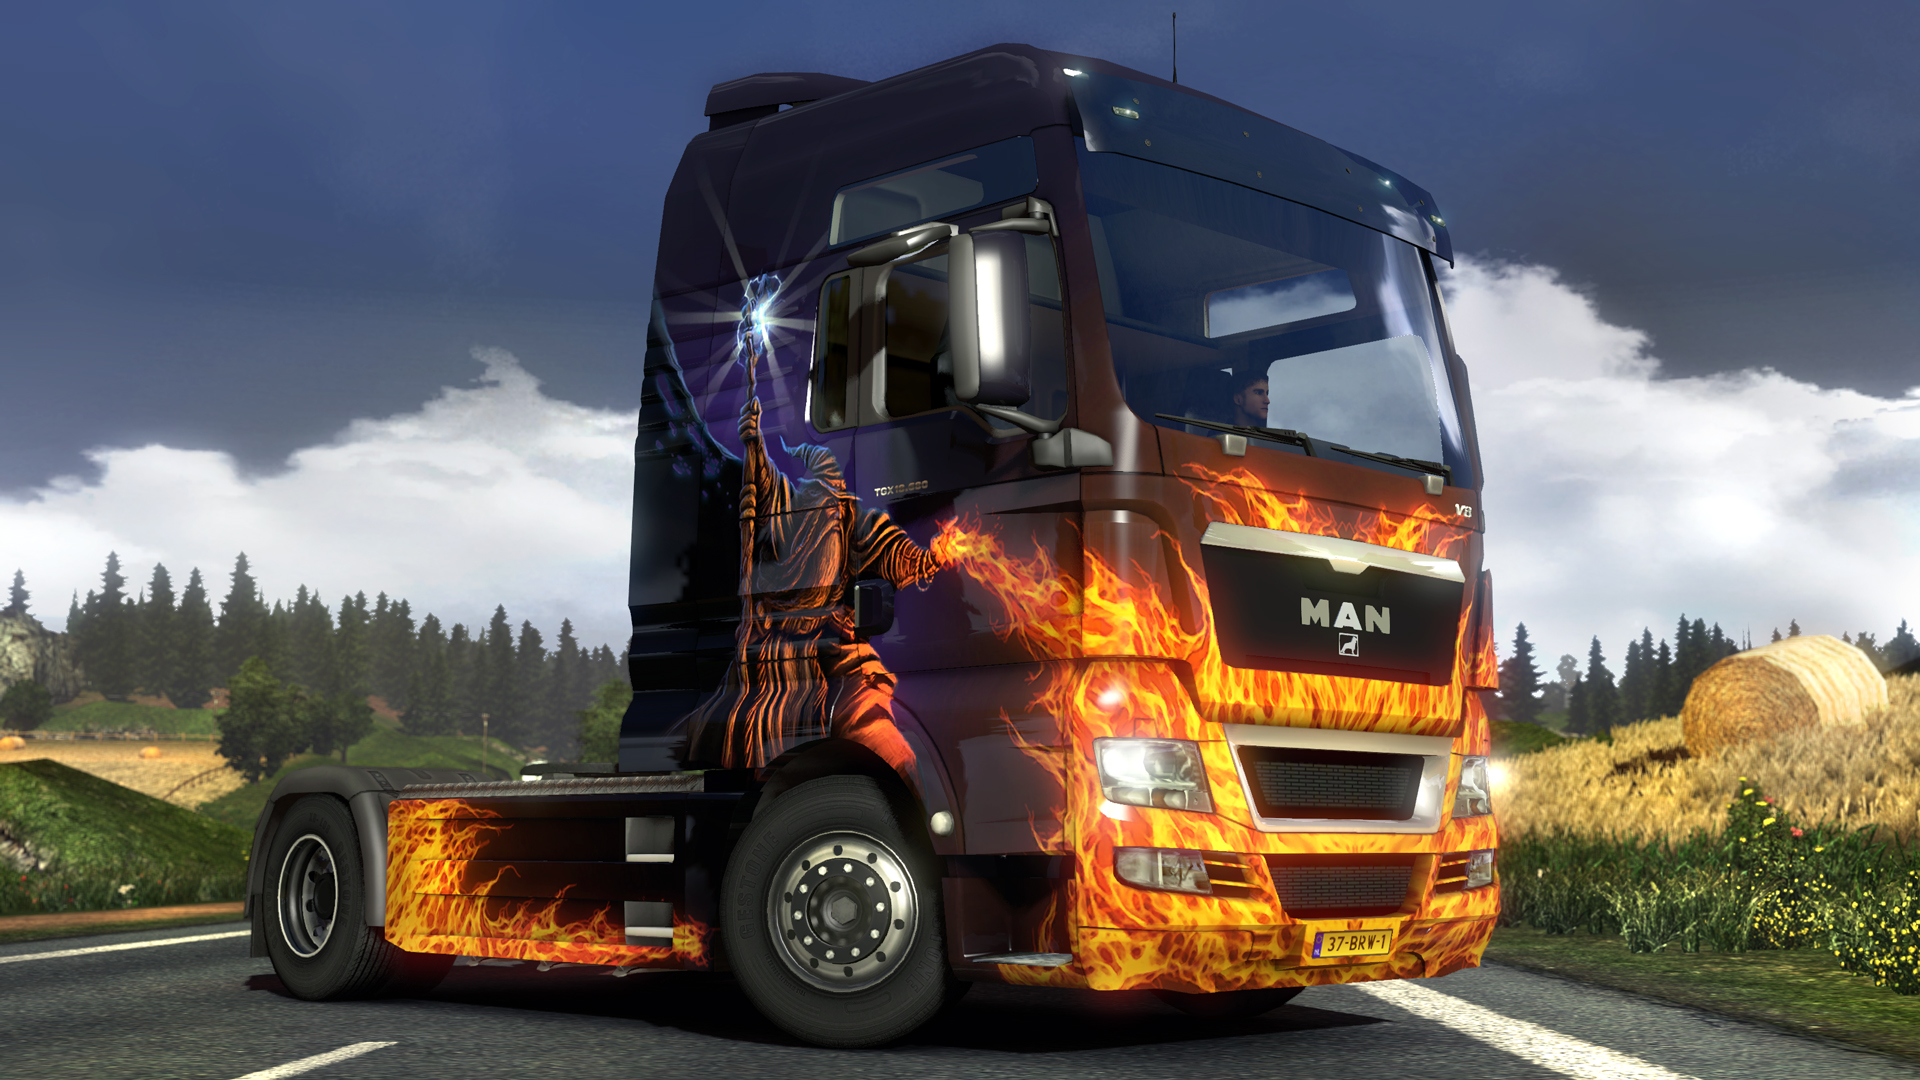 Save 50% on Euro Truck Simulator 2 - Fantasy Paint Jobs Pack on Steam